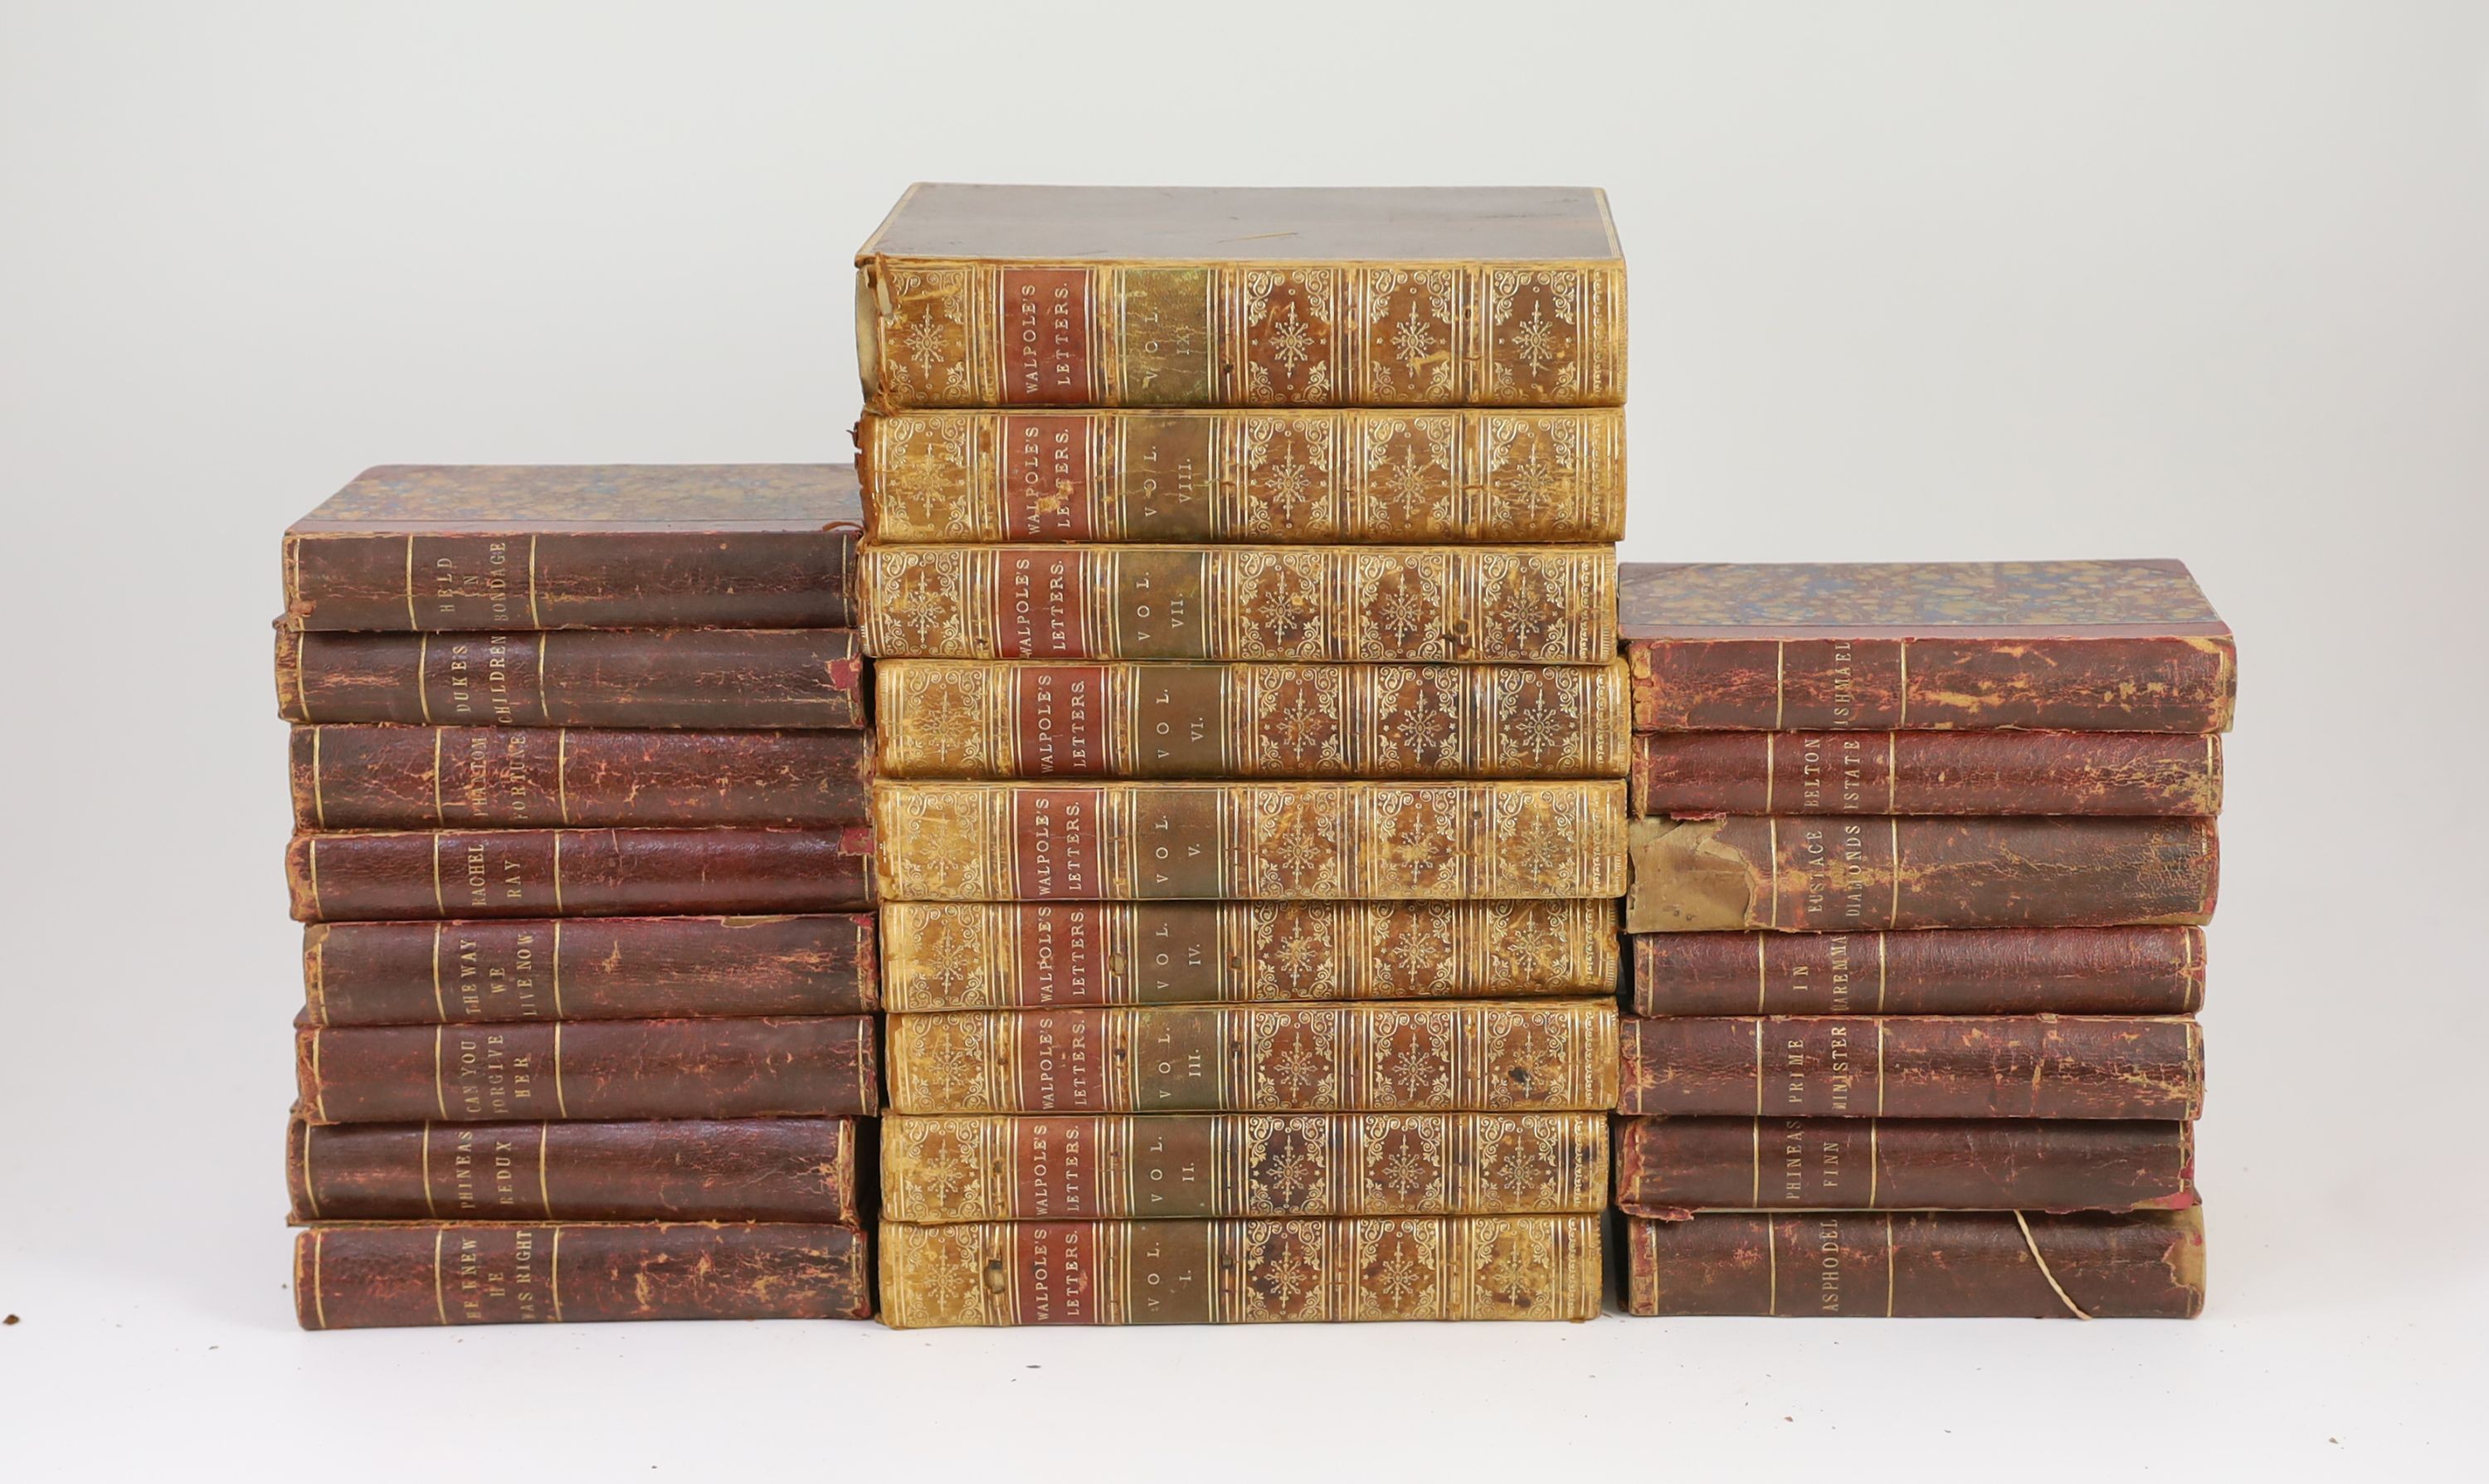 Walpole, Horace - The Letters of Horace Walpole, Earl of Orford, edited by Peter Cunningham, 9 vols, 8vo, tree calf, Henry G. Bohn, London, 1861, together with Trollope, Anthony - Works, 15 vols, 8vo, half morocco, Londo